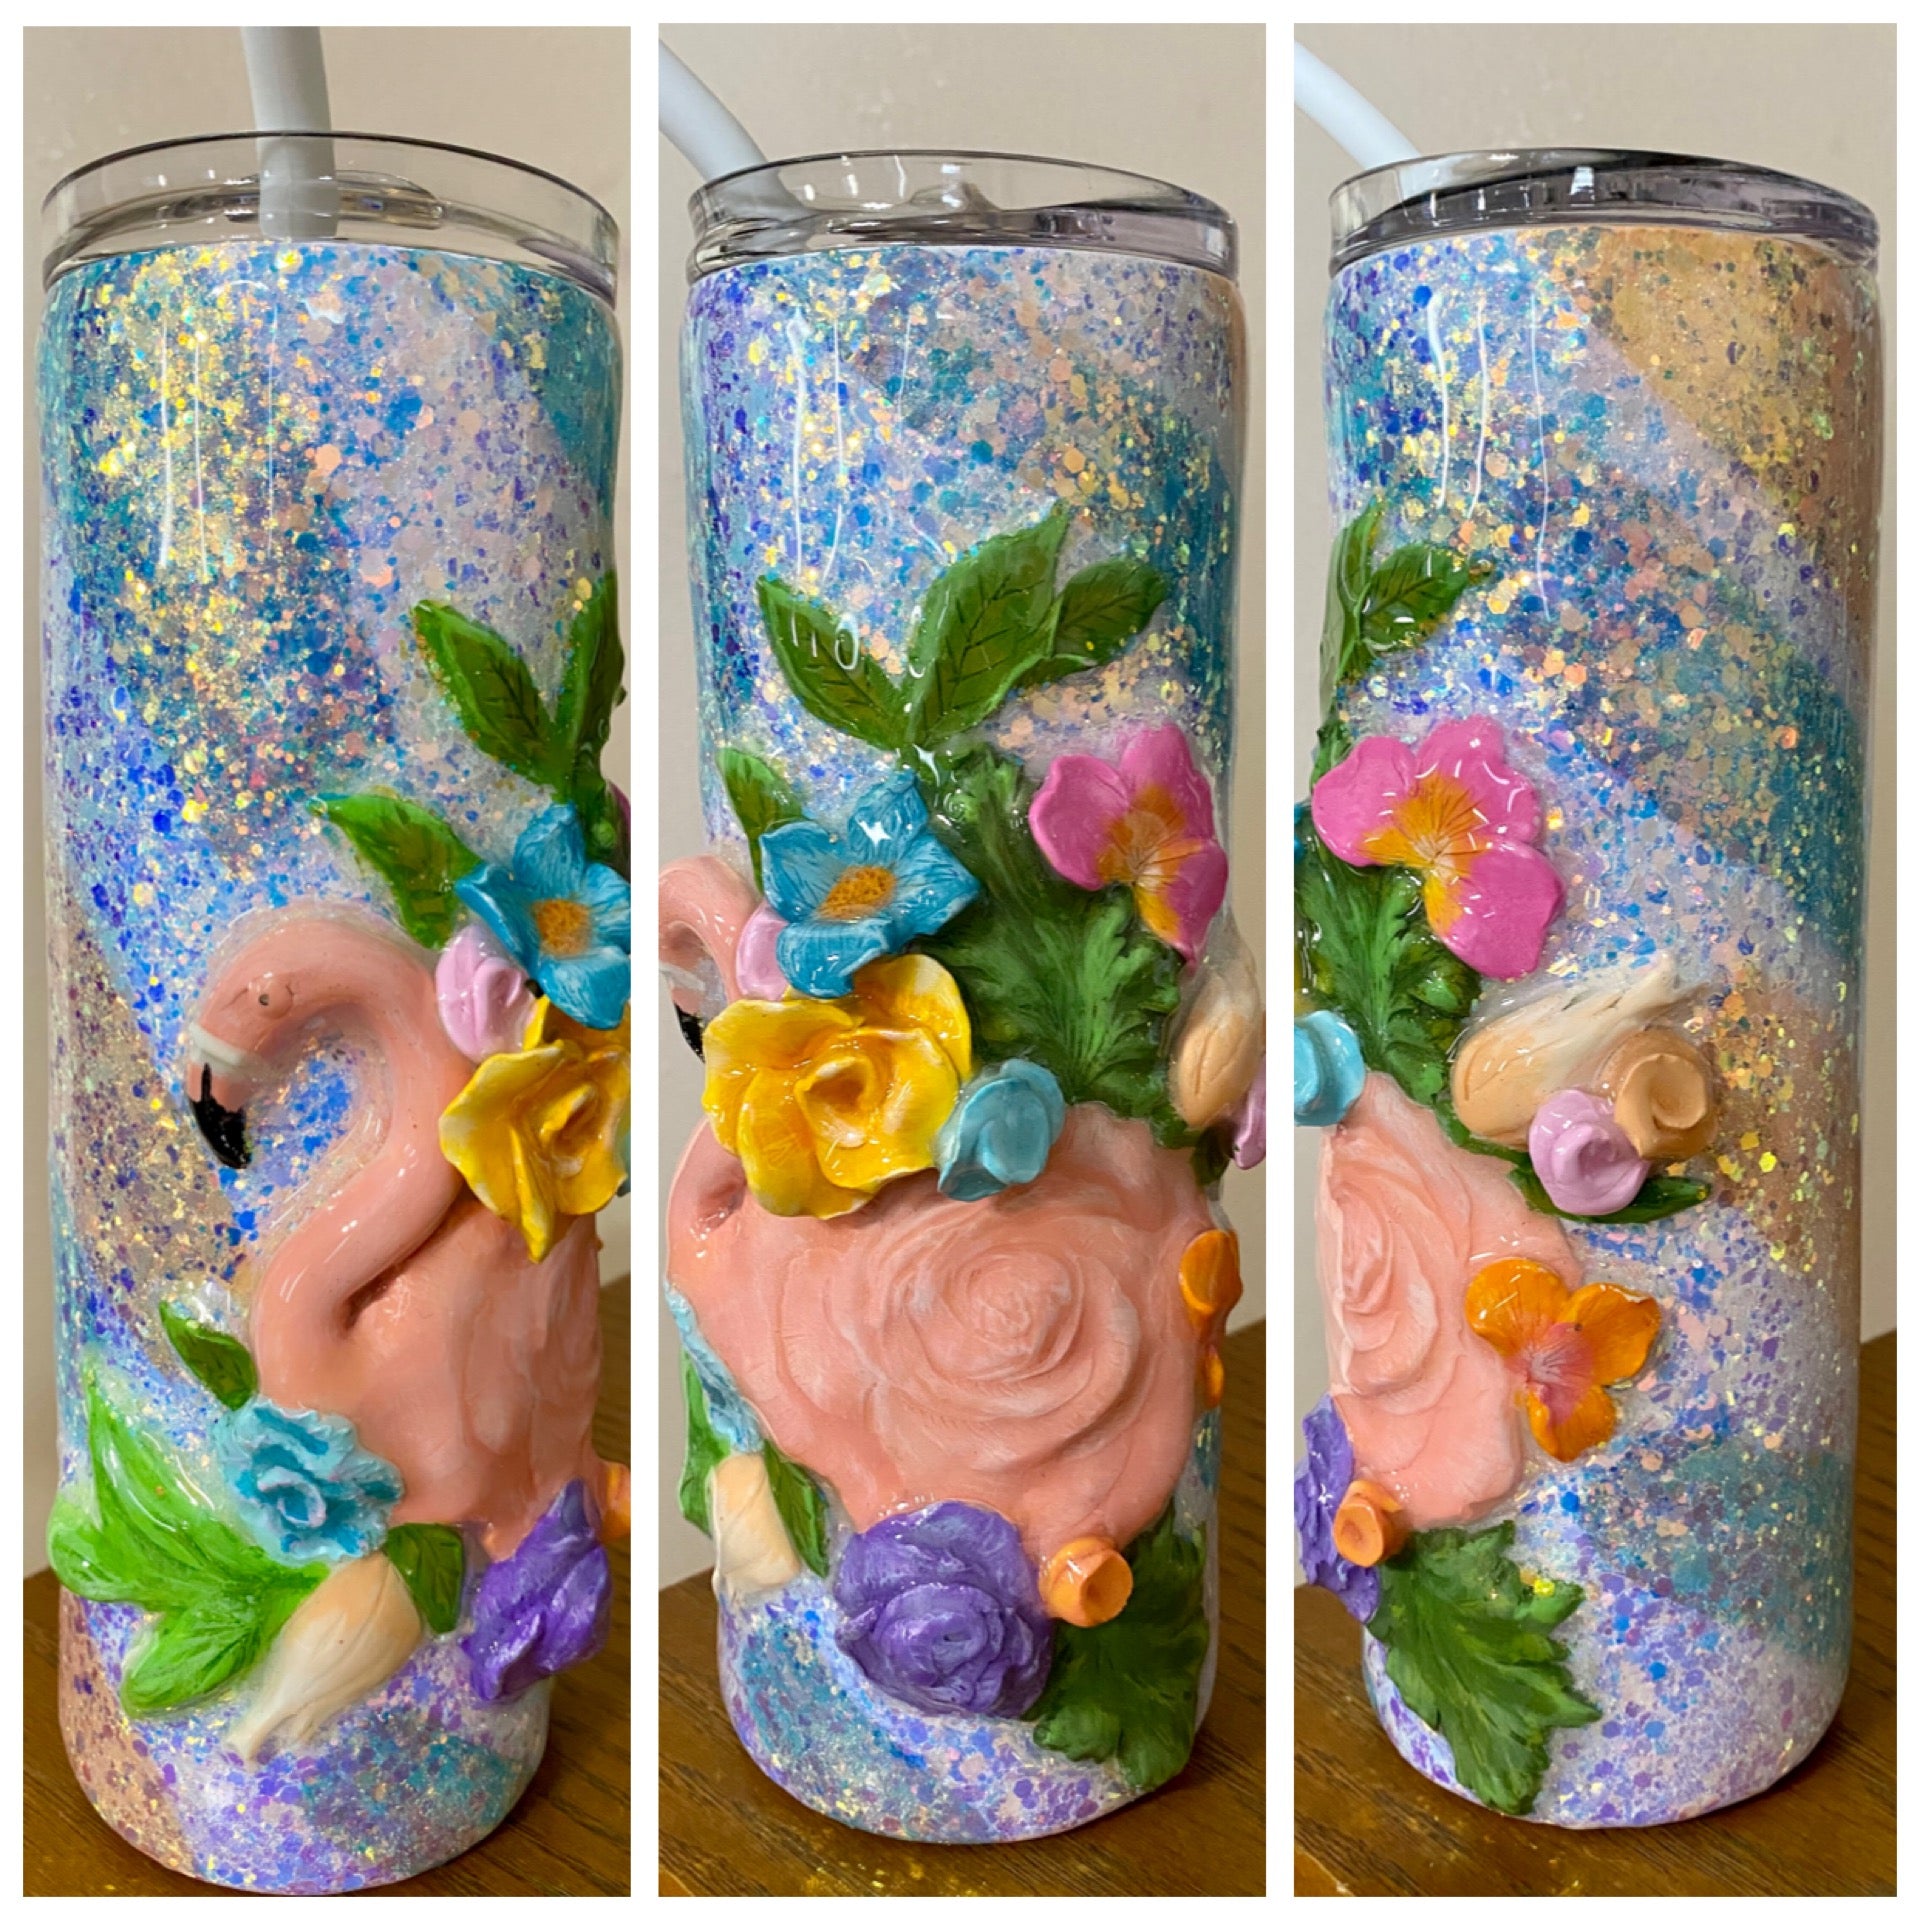 Stunning 3D Floral 4 in 1 Can Cooler and Tumbler - 60 Designs